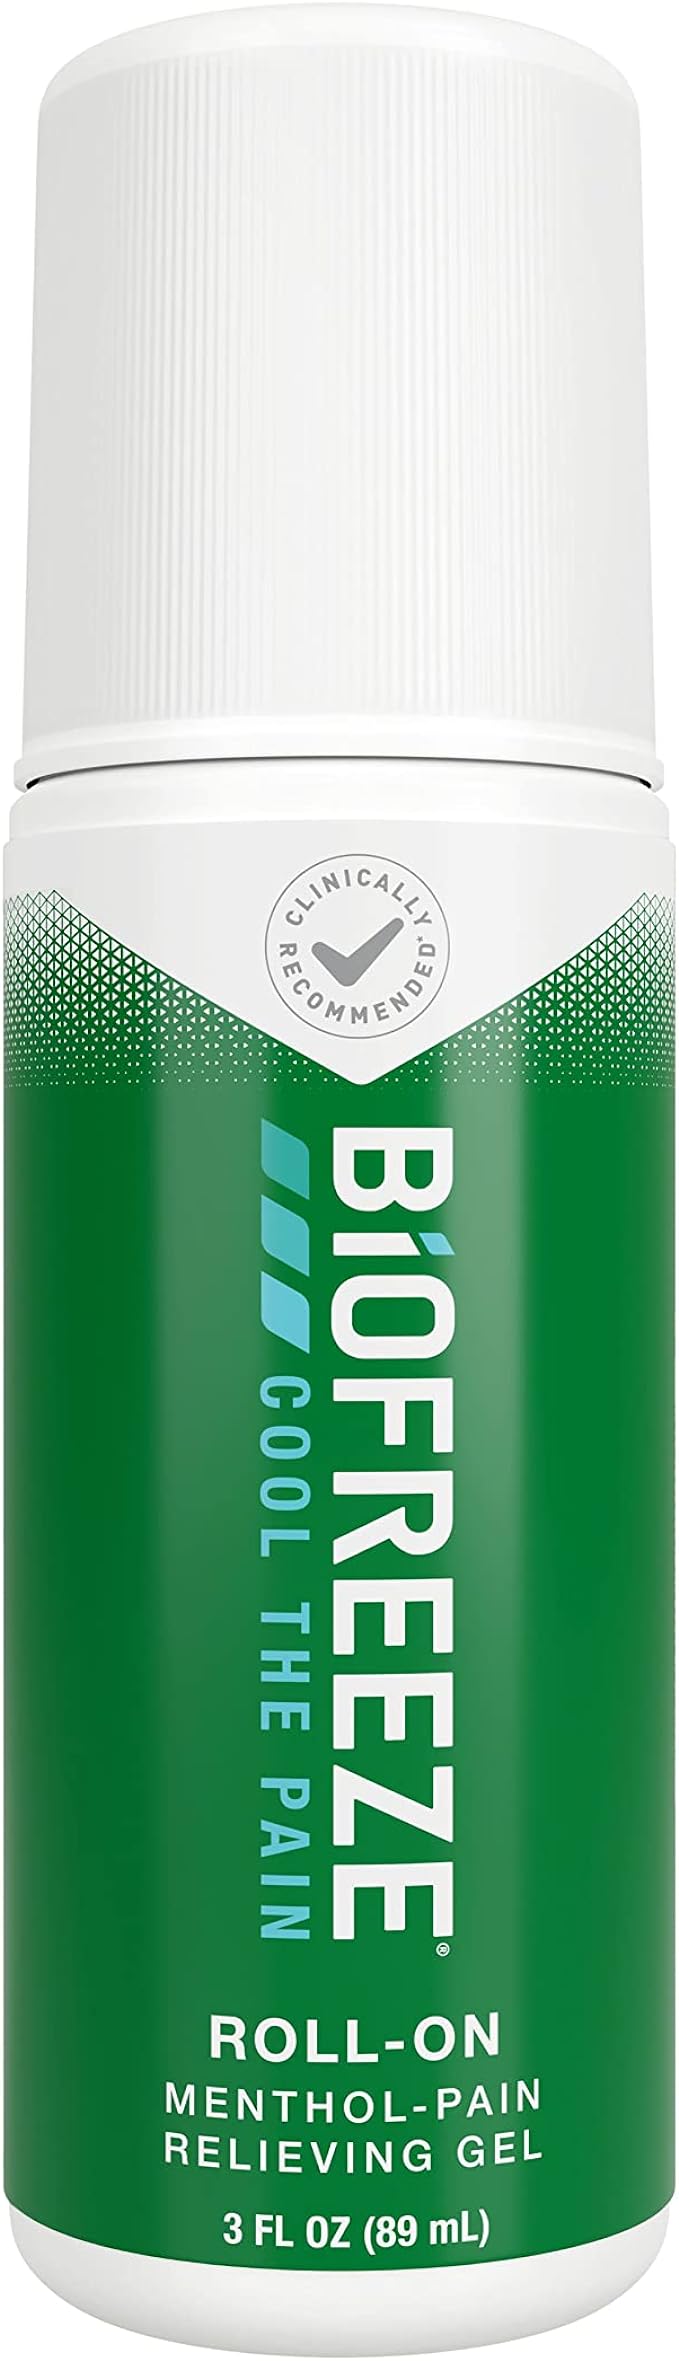 Biofreeze Roll-On Pain-Relieving Gel 3 FL OZ, Green Top